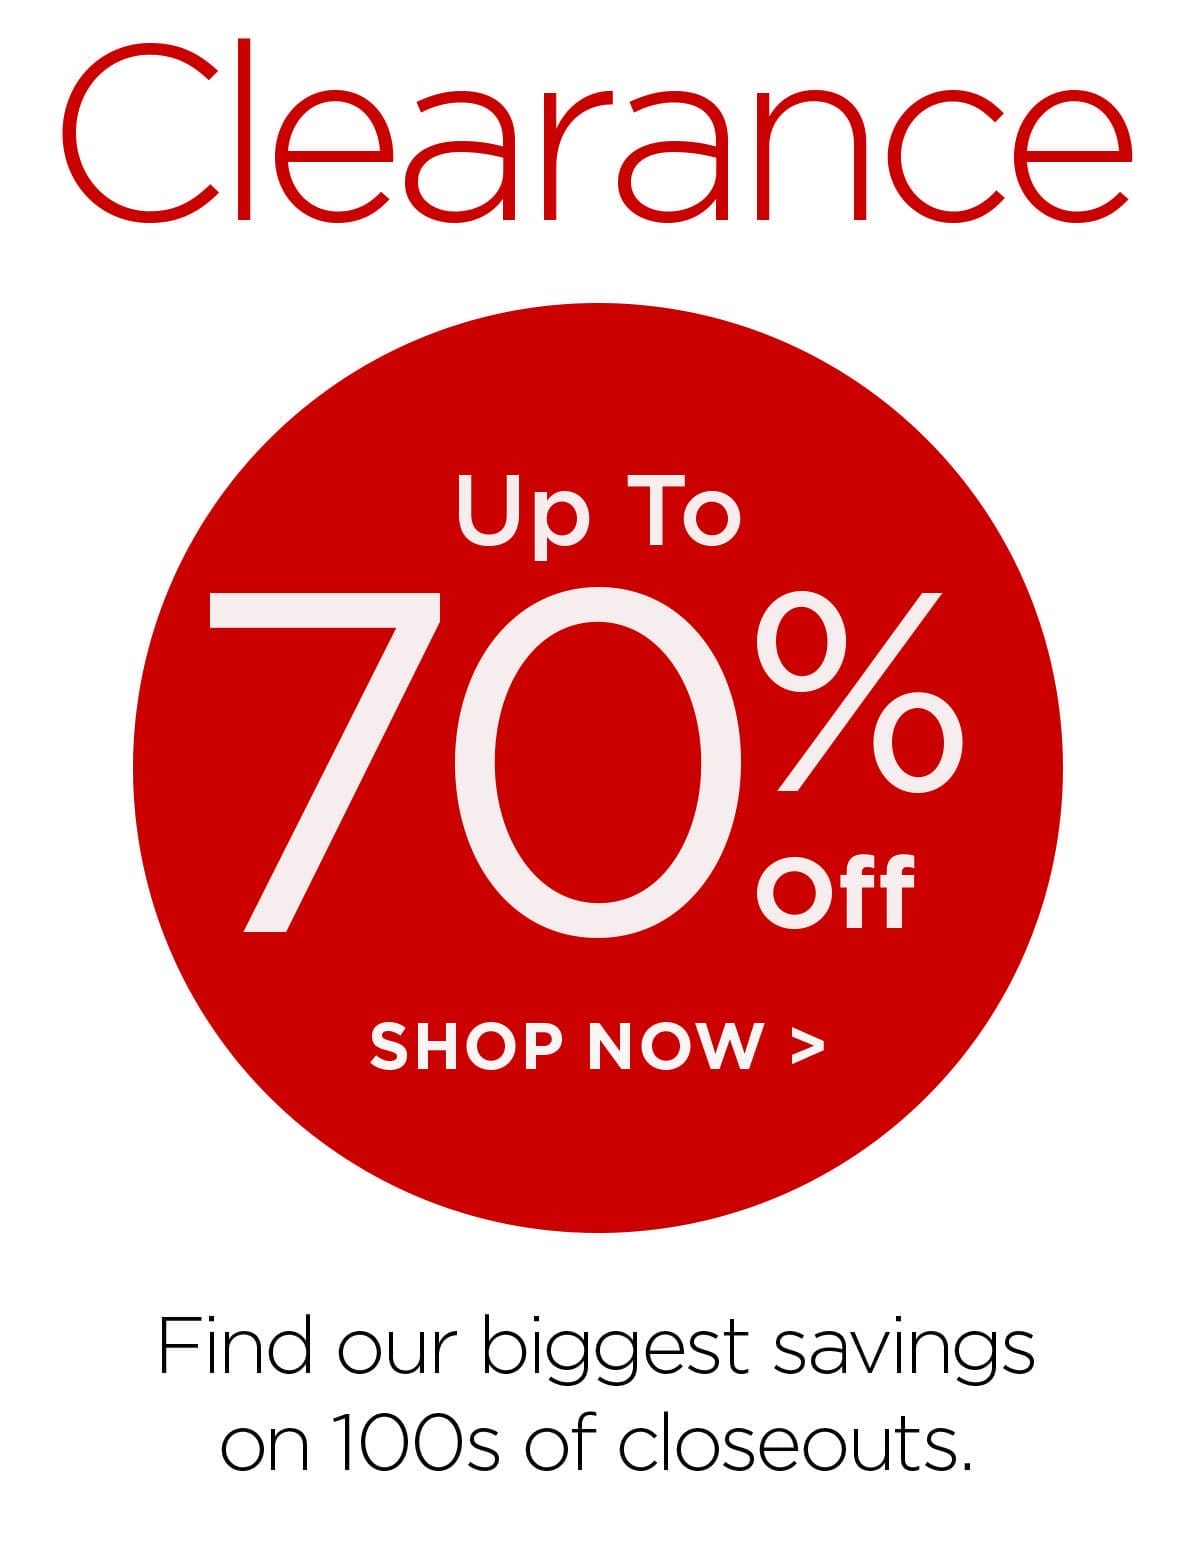 Clearance Up to 70% Off - Shop Now > Find our biggest savings on 100s of closeouts.